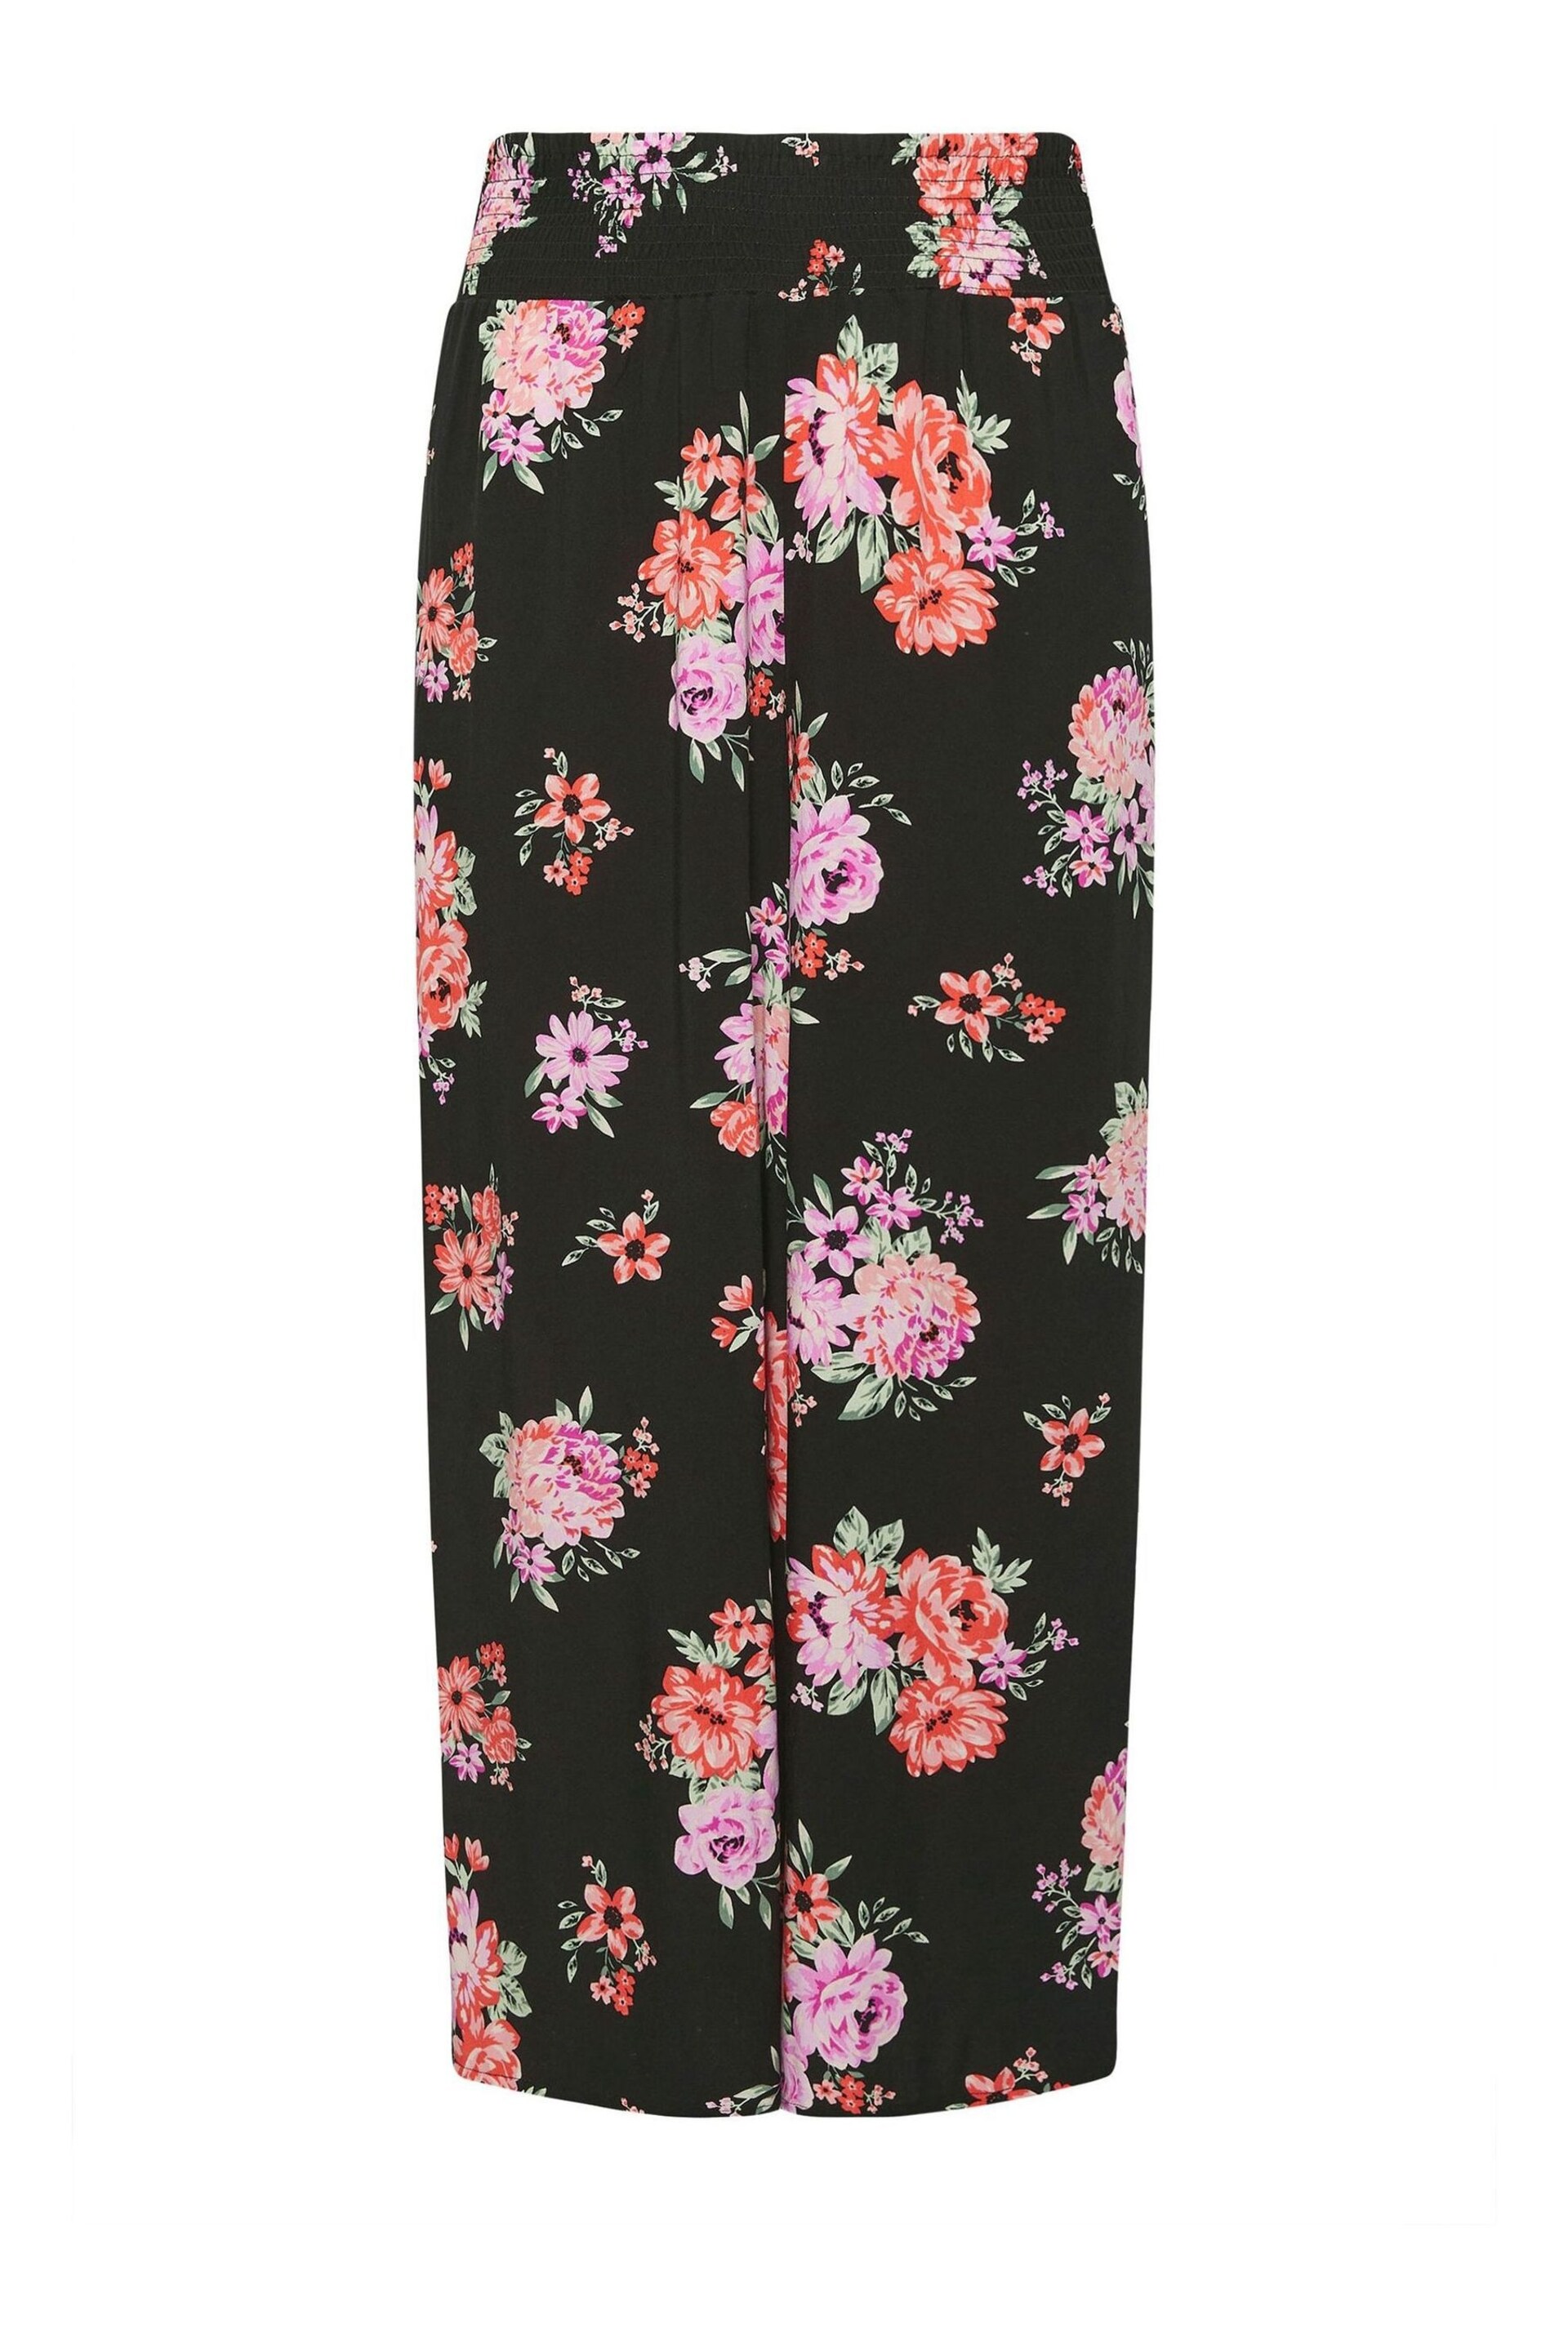 Yours Curve Black Floral Bloom Print Shirred Wide Leg Trousers - Image 5 of 5